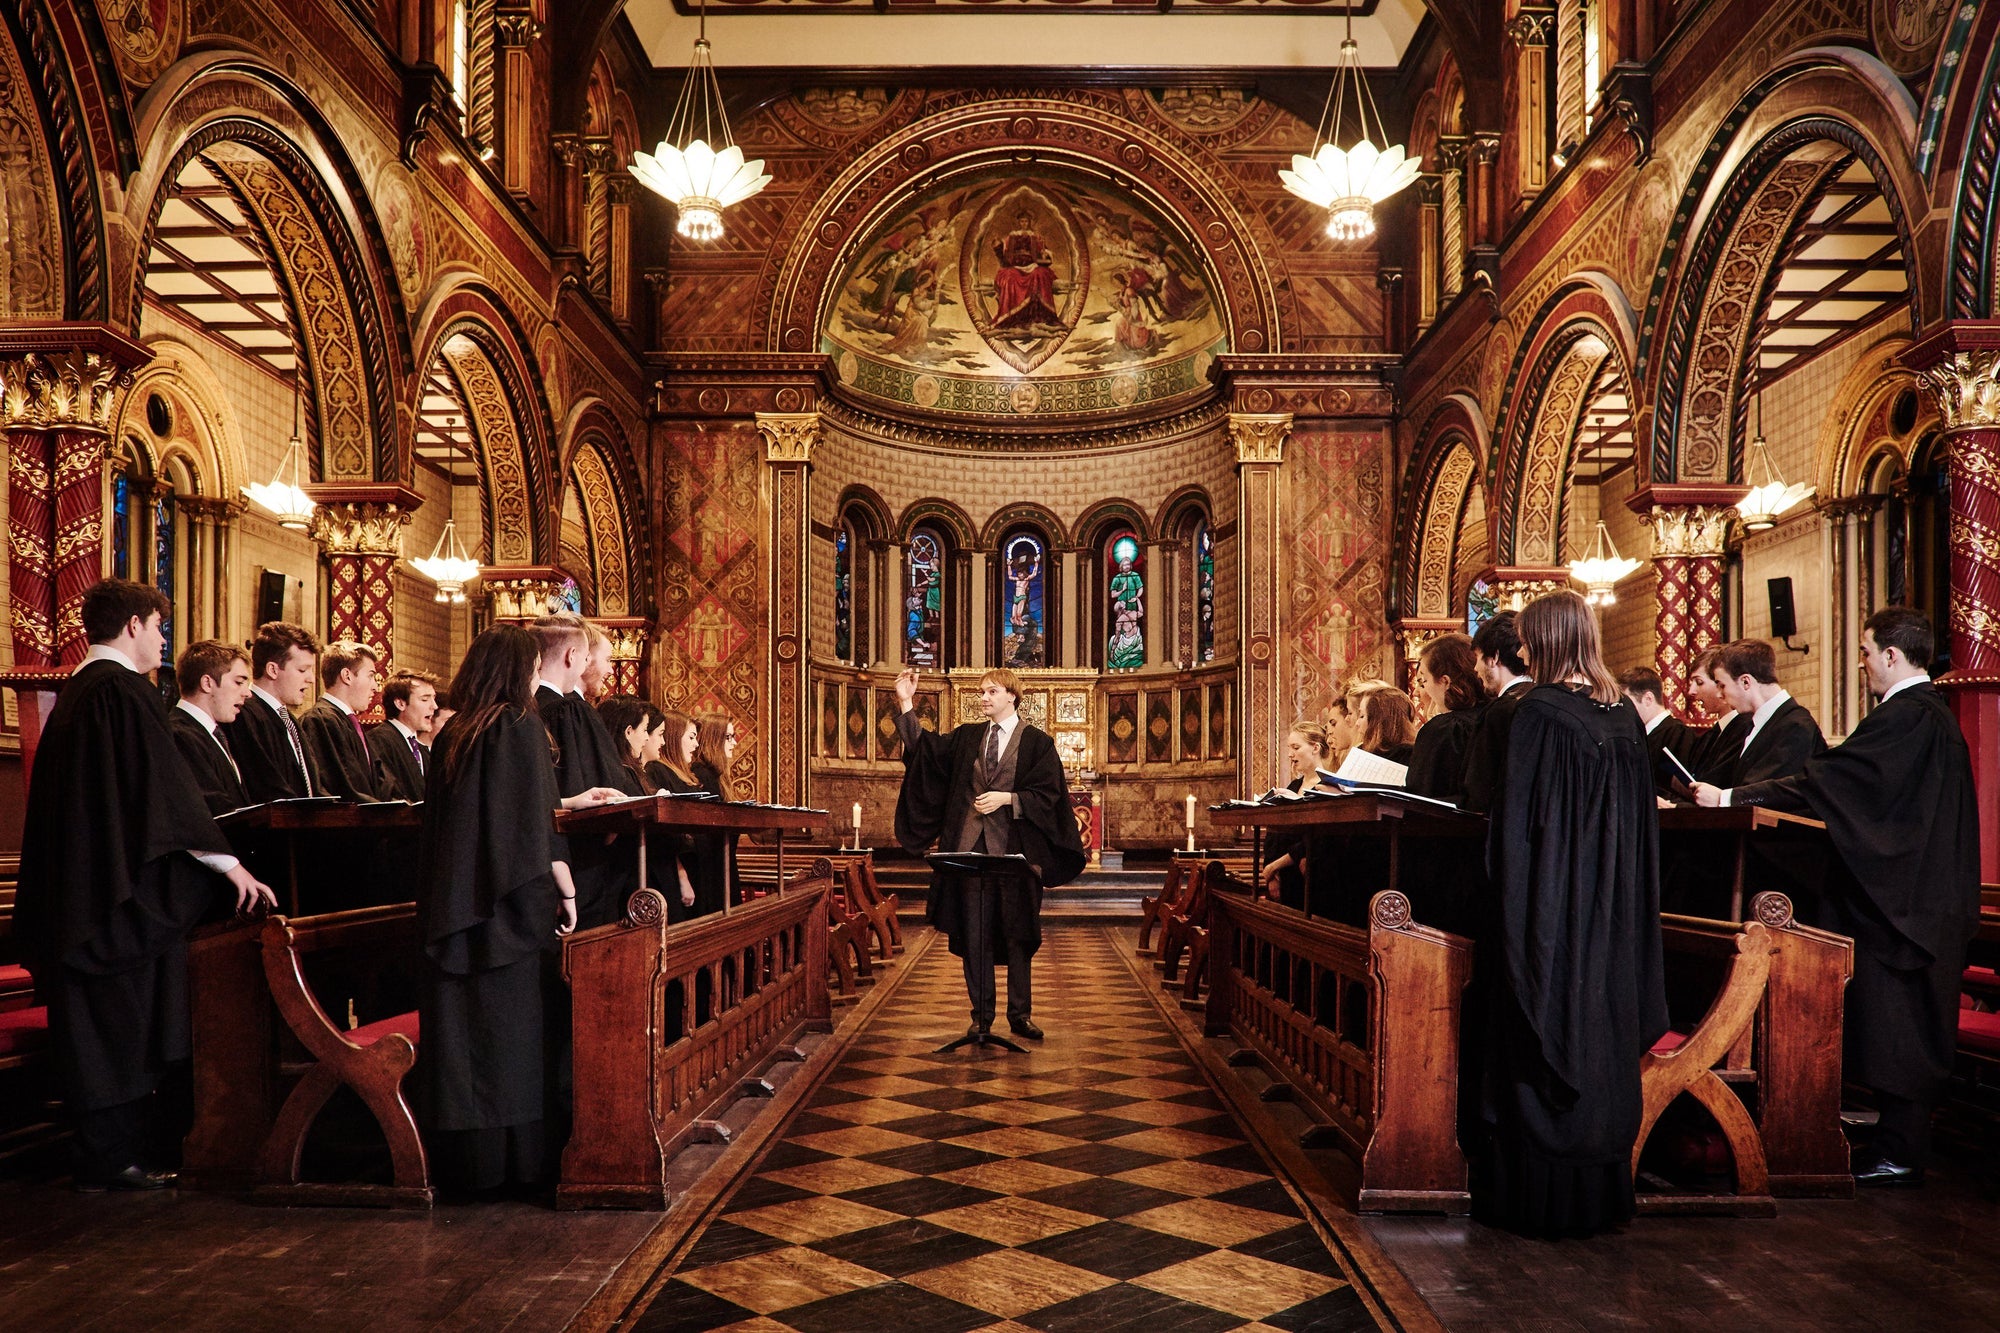 The Choir of King’s College London